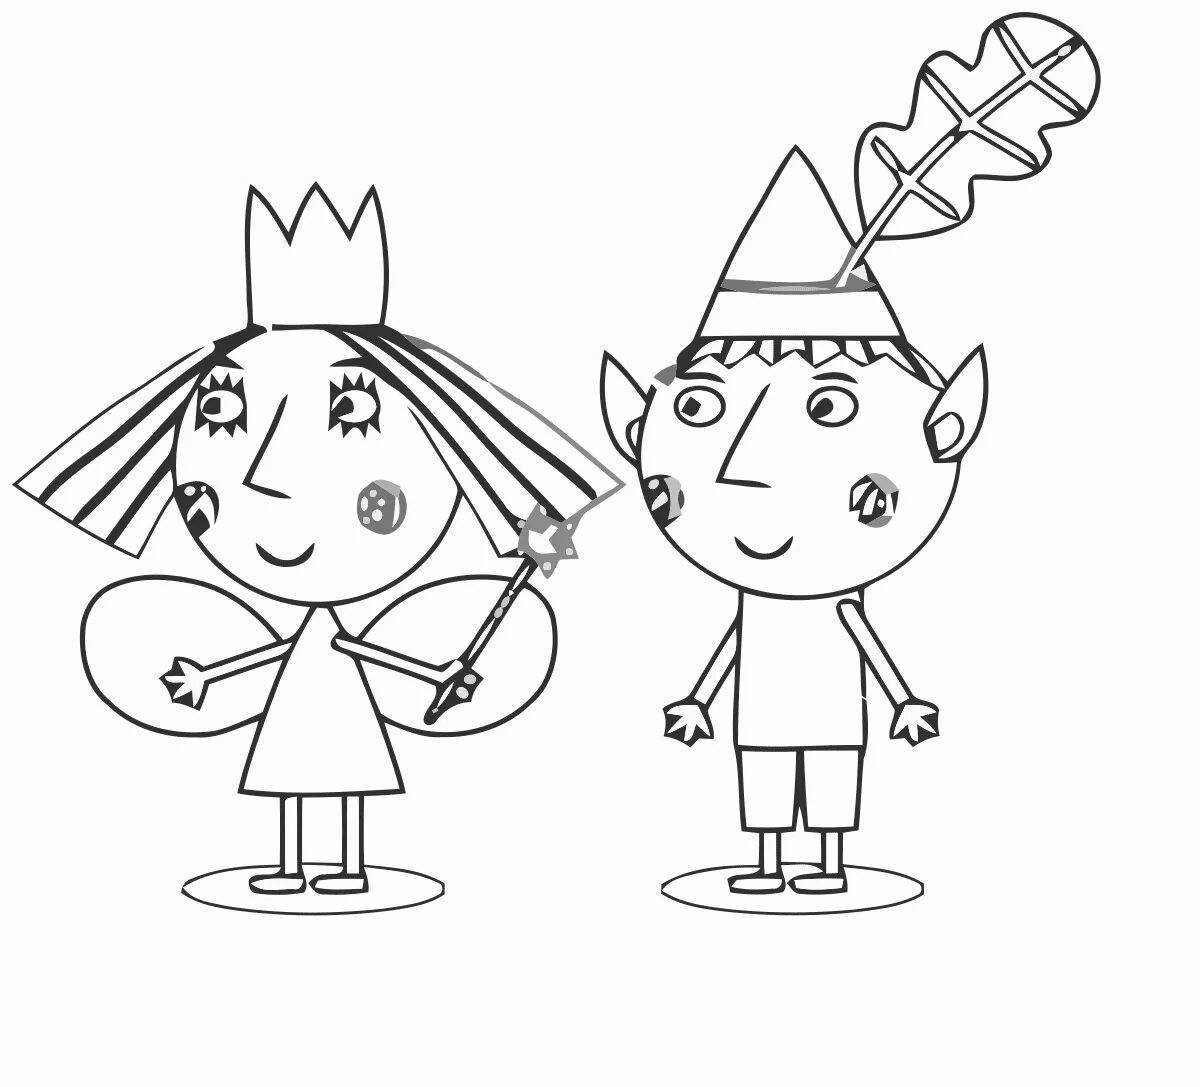 Ben and holly's little kingdom beautiful coloring book